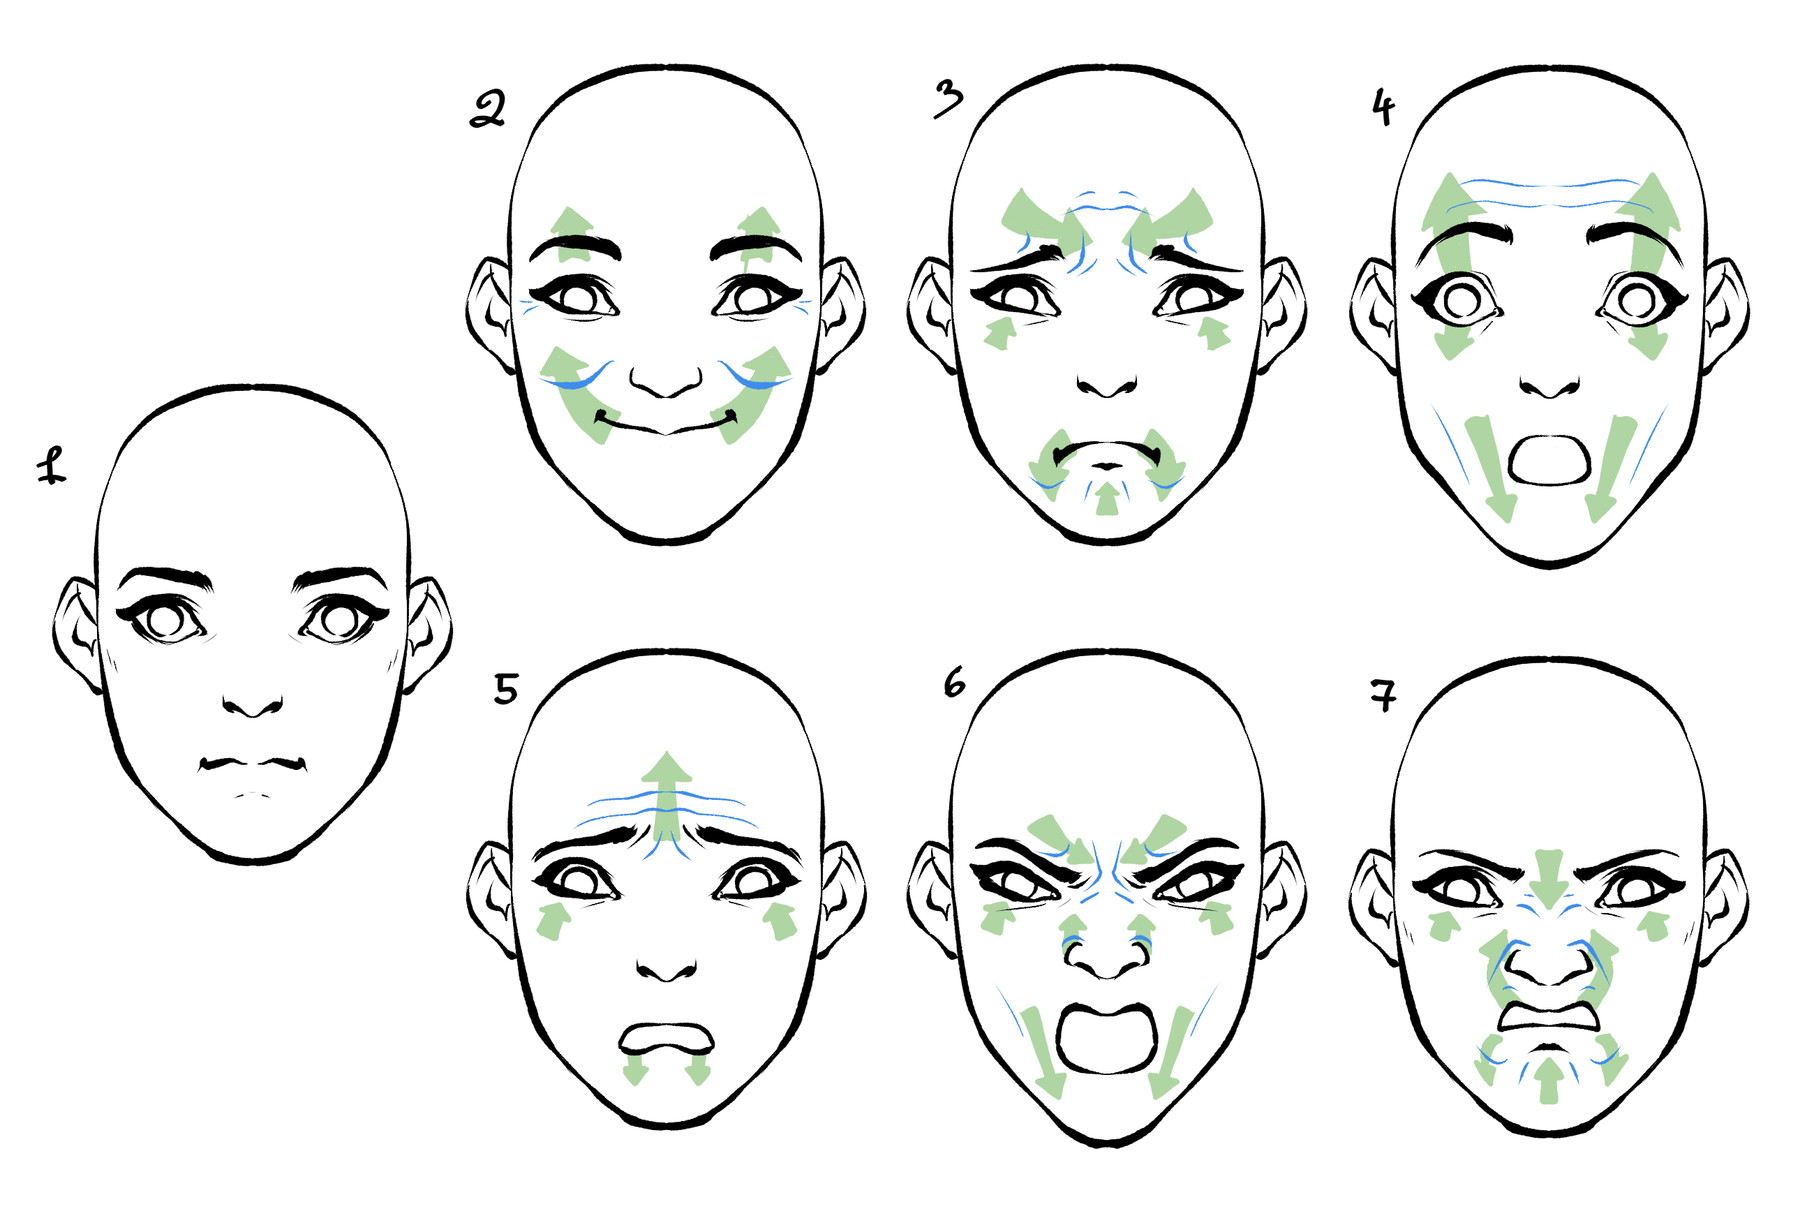 ArtStation - Facial anatomy for stylized and realistic style | Tutorials